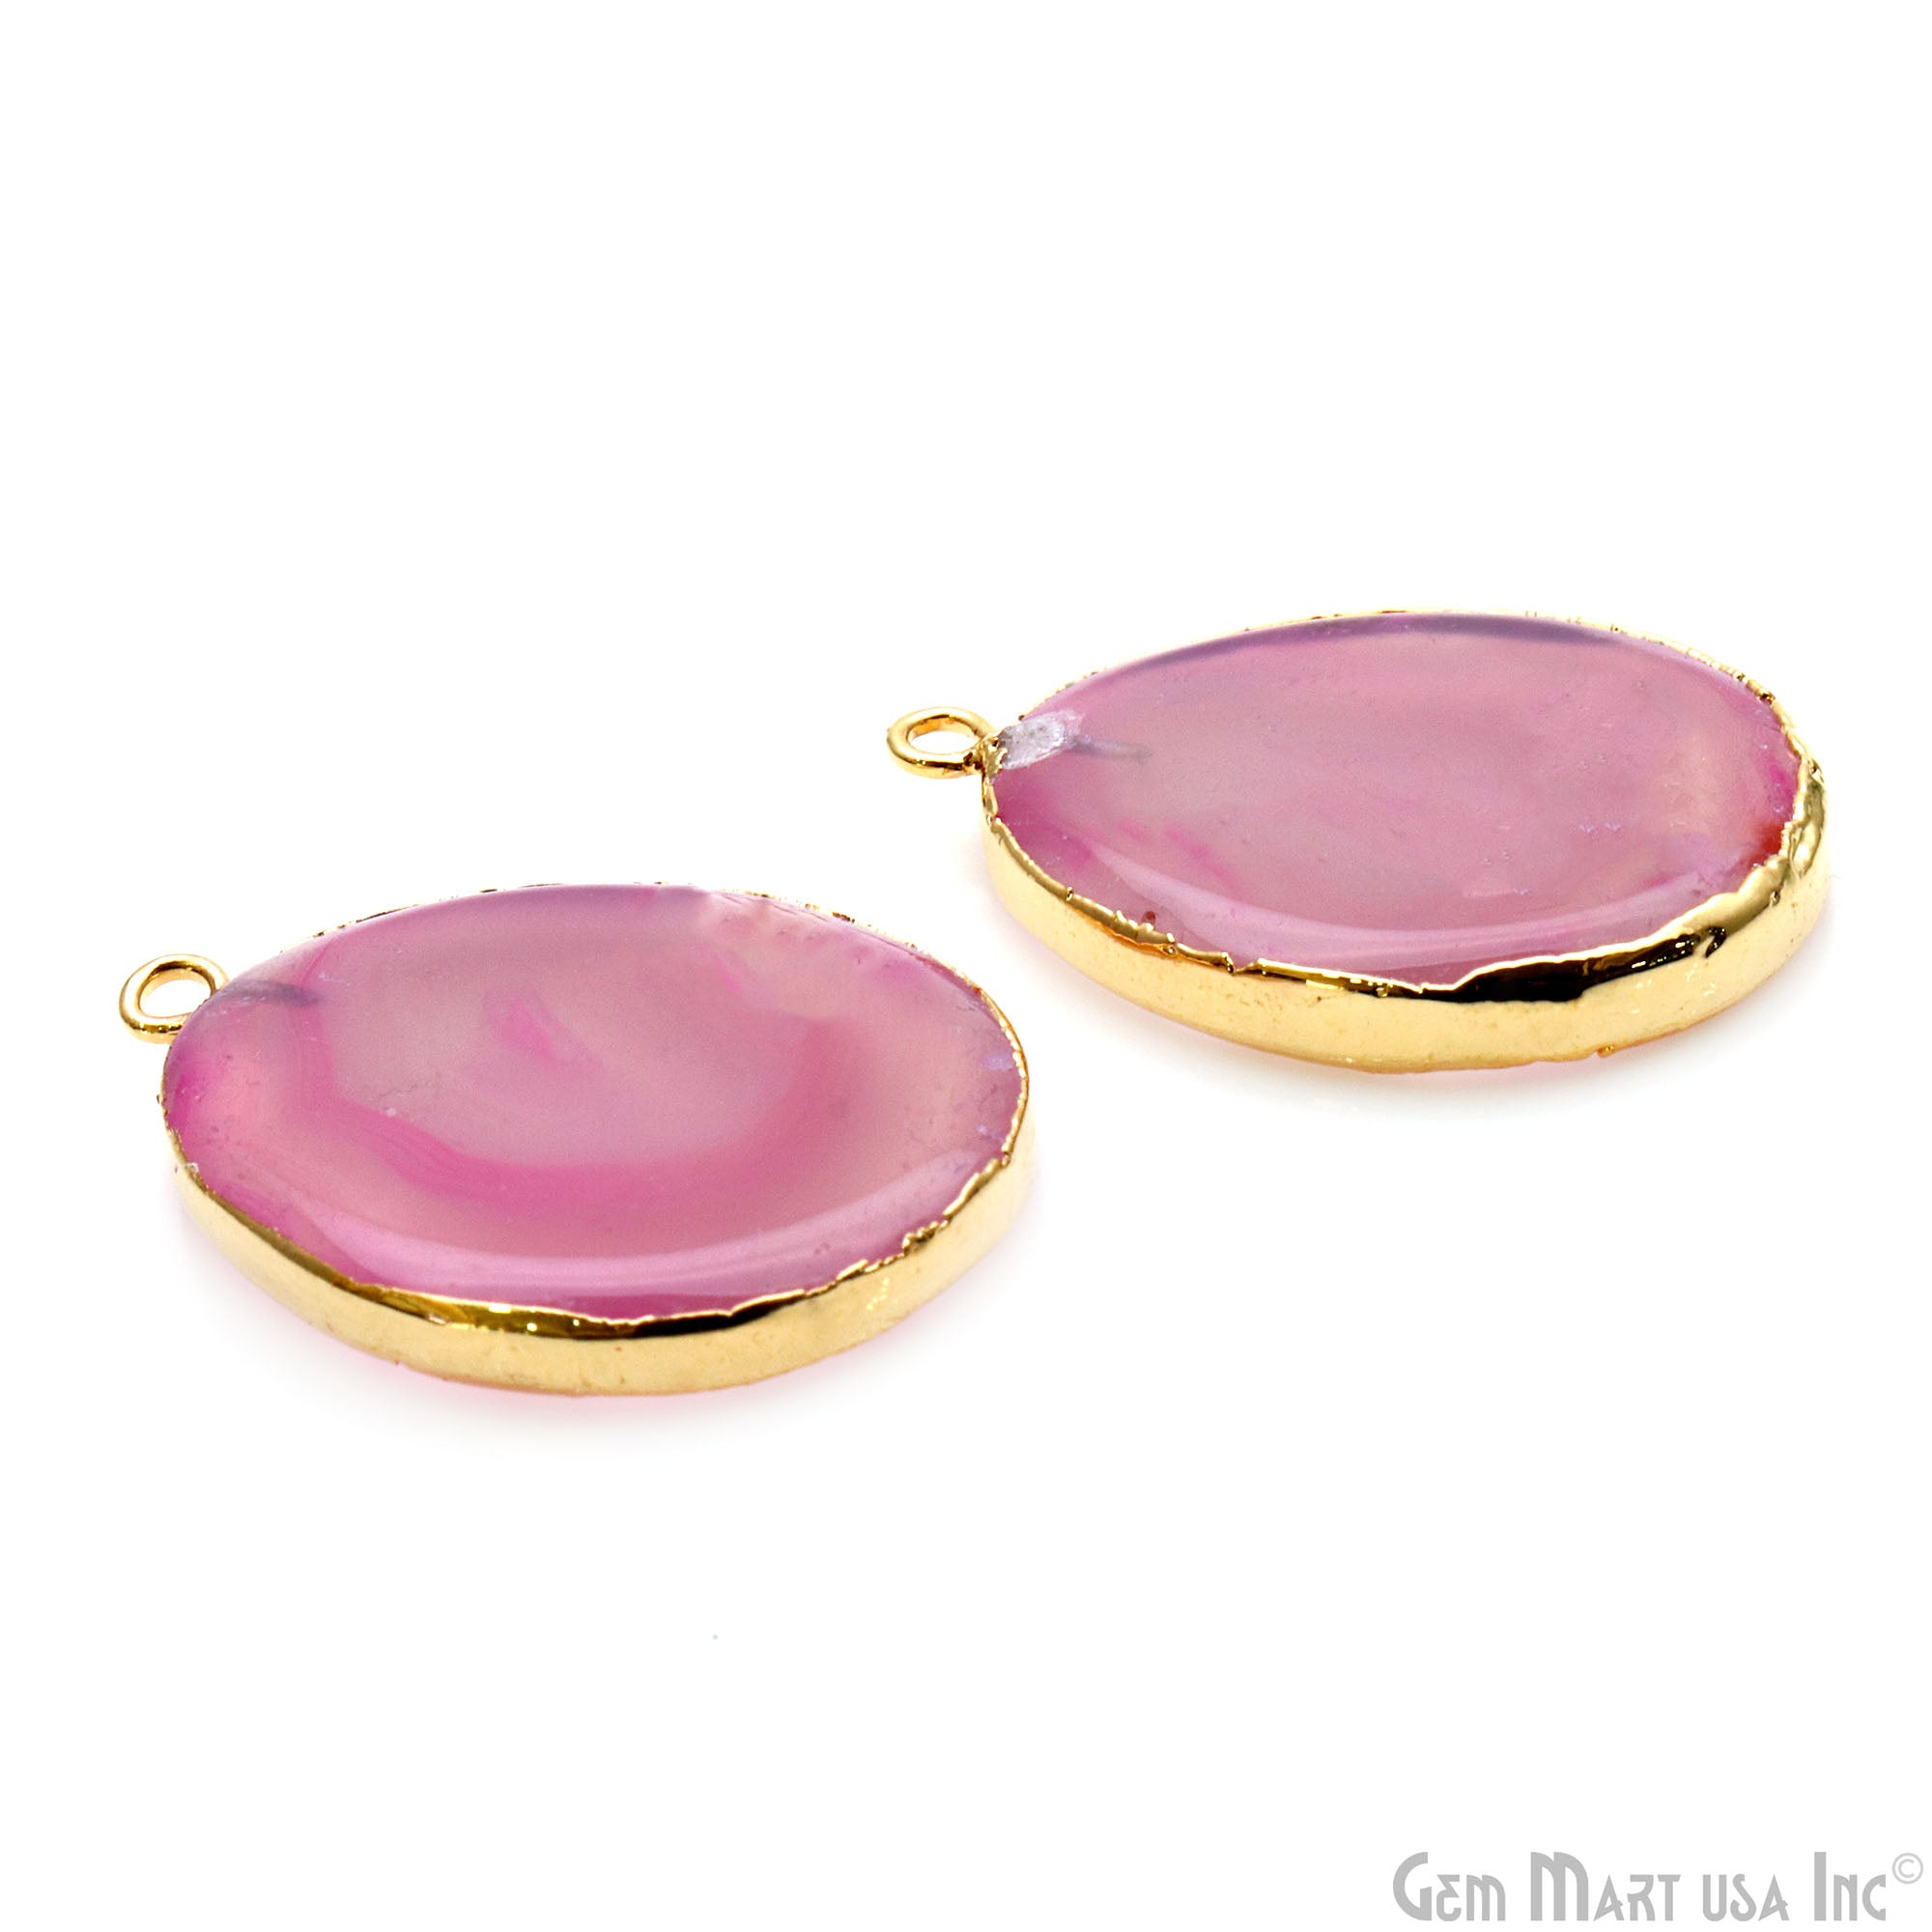 Agate Slice 29x20mm Gold Electroplated Gemstone Earring Connector 1 Pair